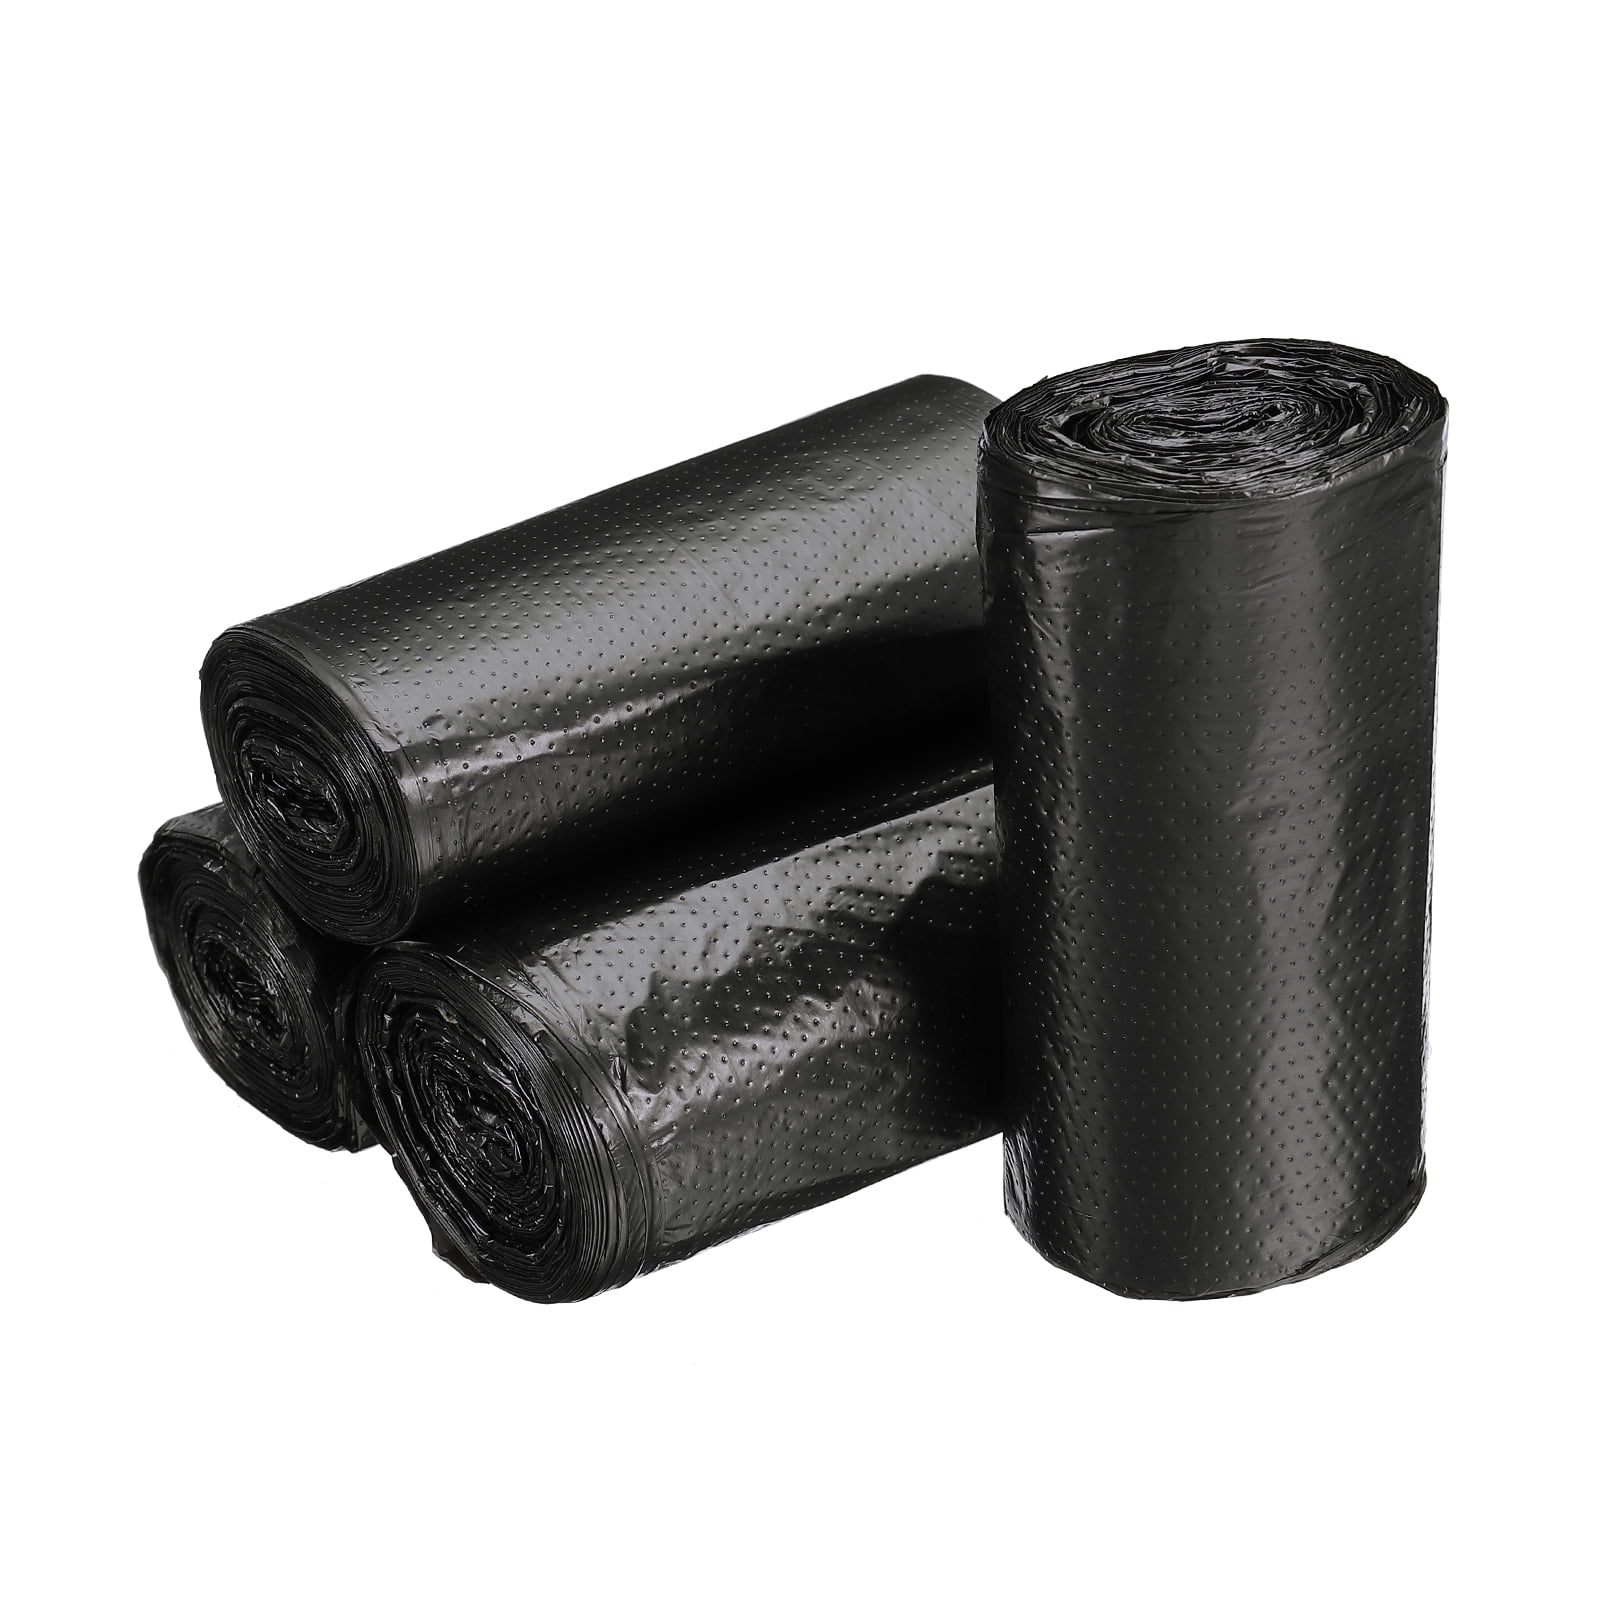 8 Rolls / 240 Counts Small Trash Bags 0.5 Gallon Garbage Bags White